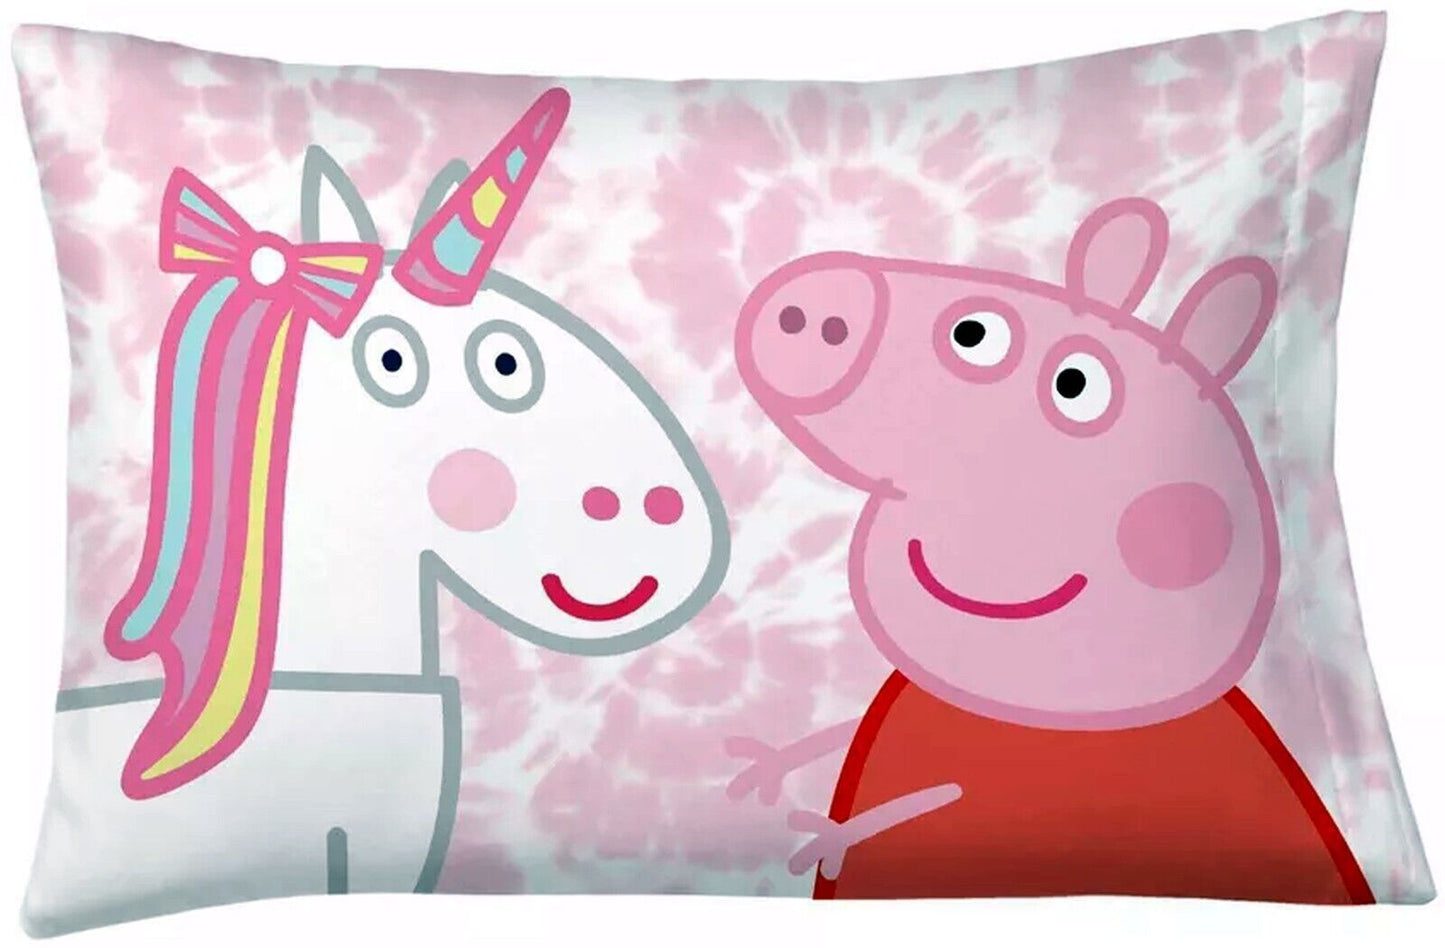 Peppa Pig Pillowcase measures 20 x 30 inches